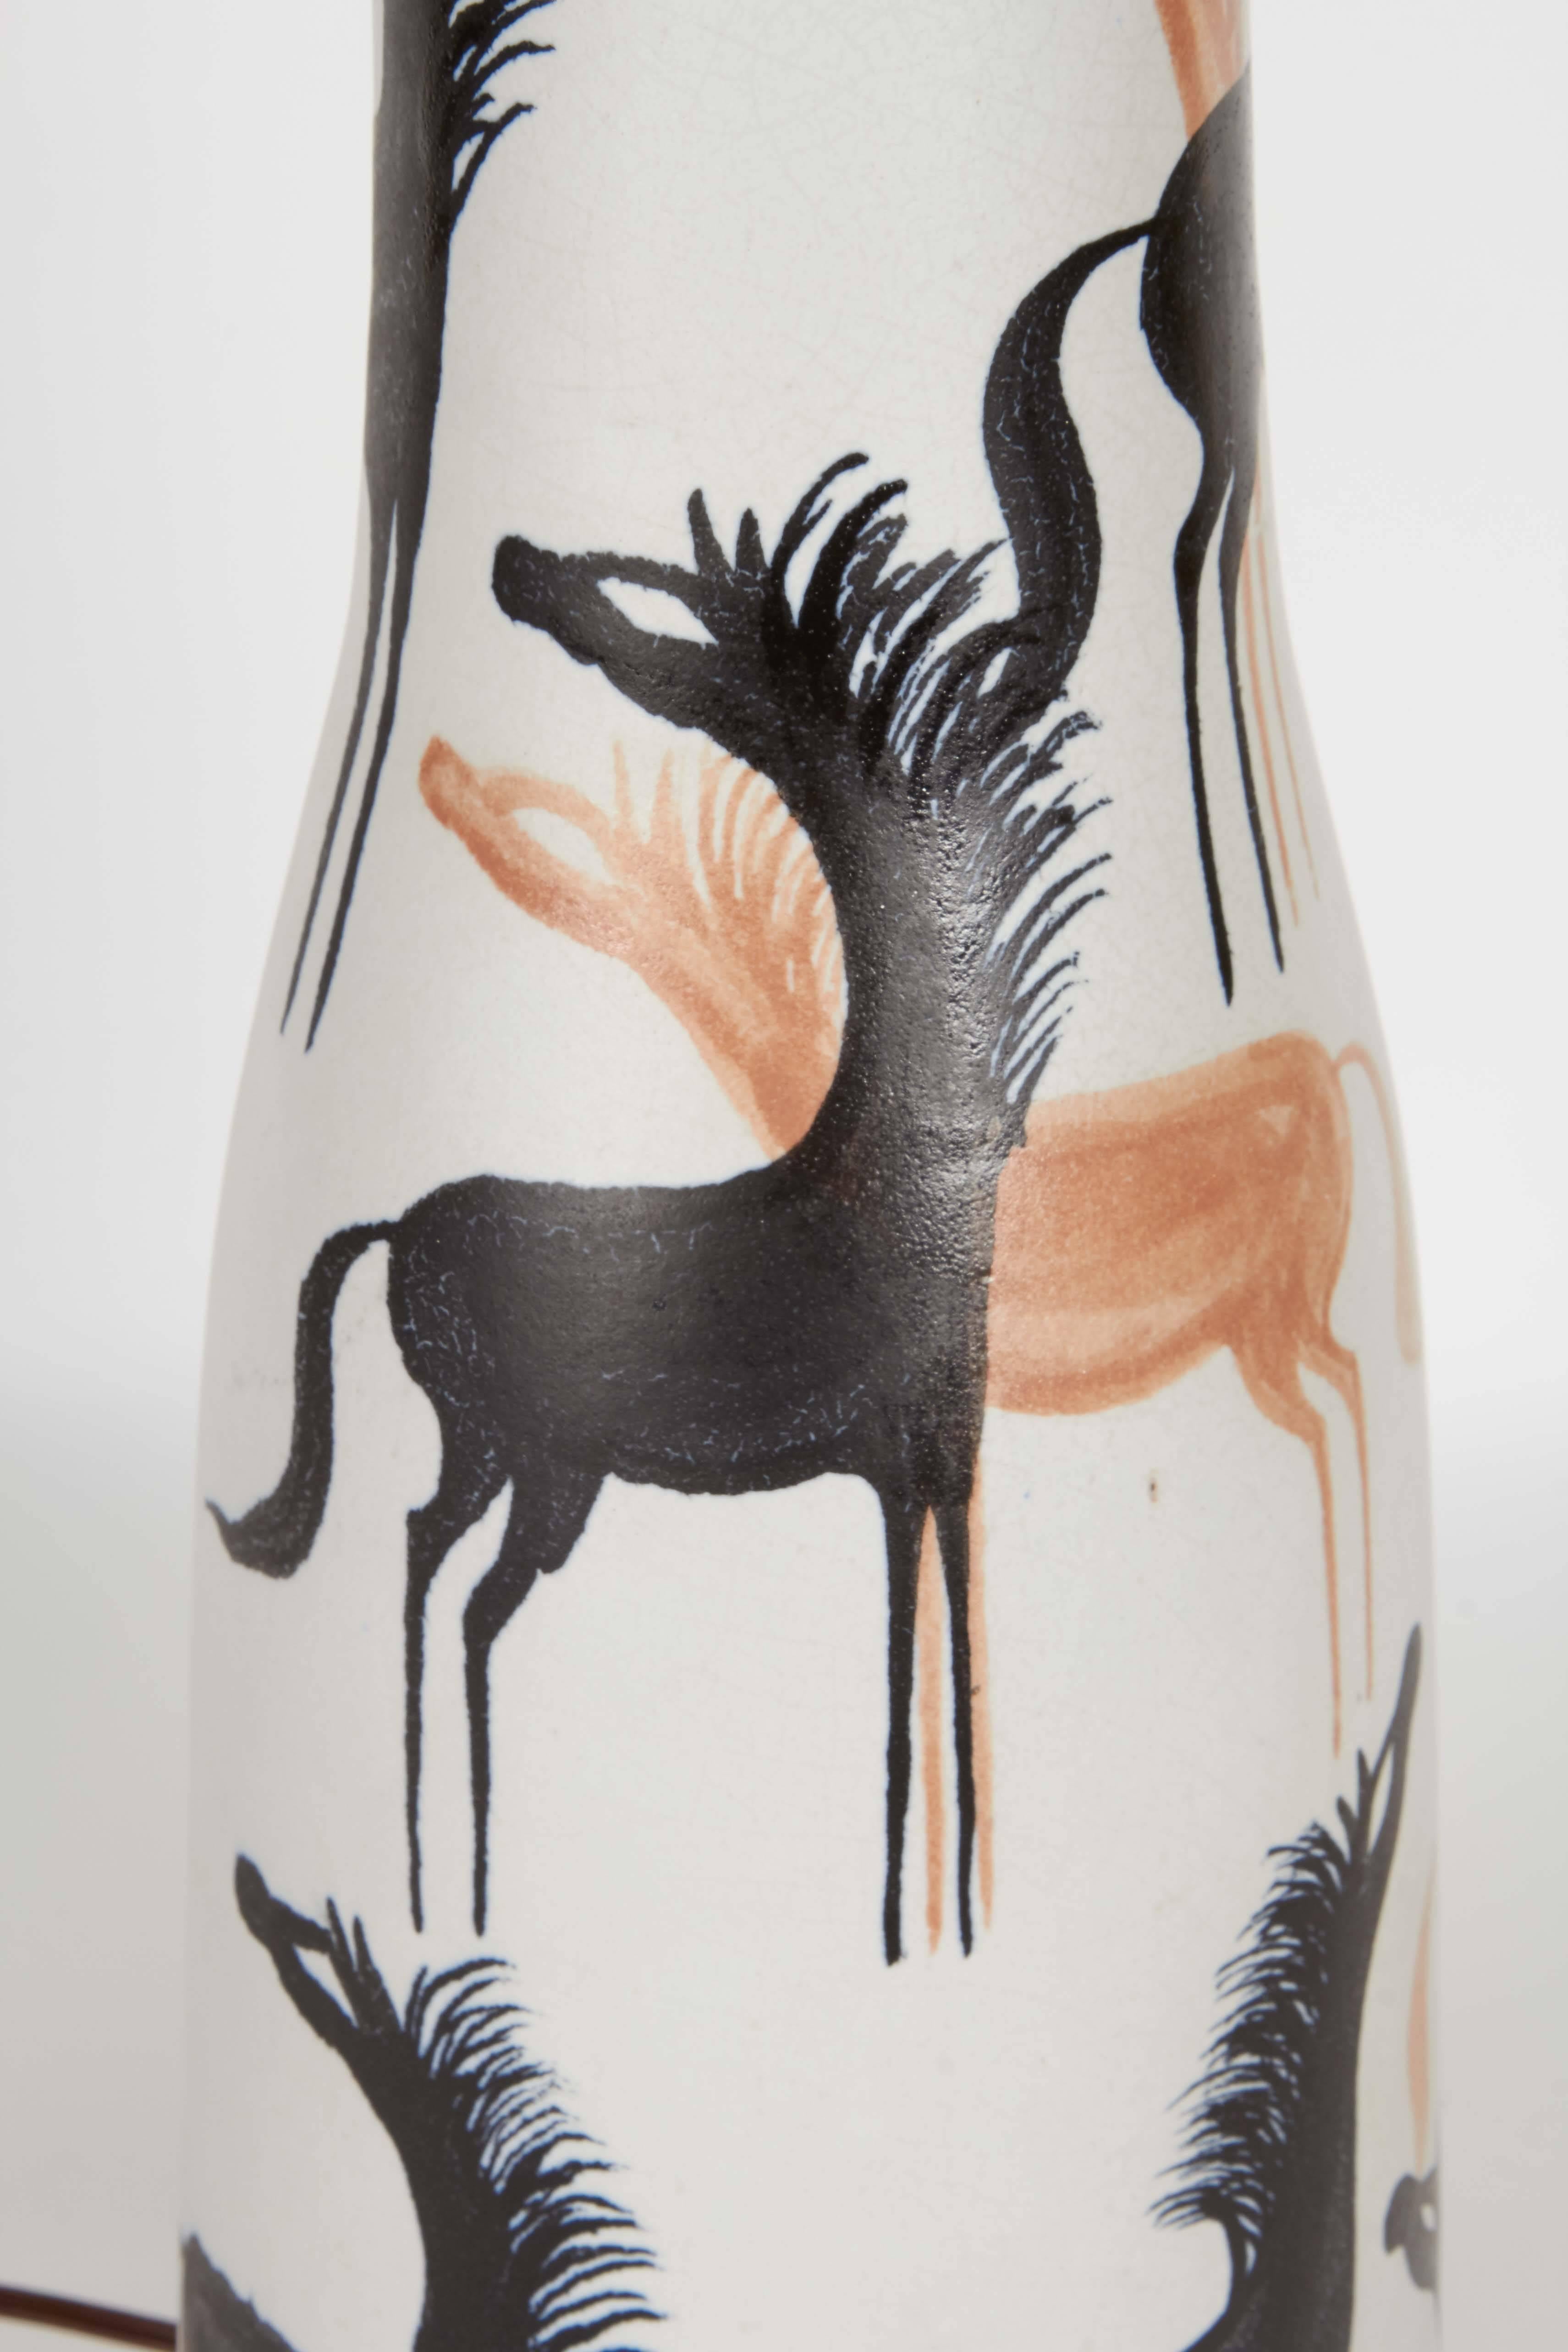 A ceramic lamp circa 1960s, manufactured in Italy, the single socket on a tapered body with matte glaze, decorated with orange and black horses in the primitive style. This lamp remains in very good vintage condition, wear consistent with age and